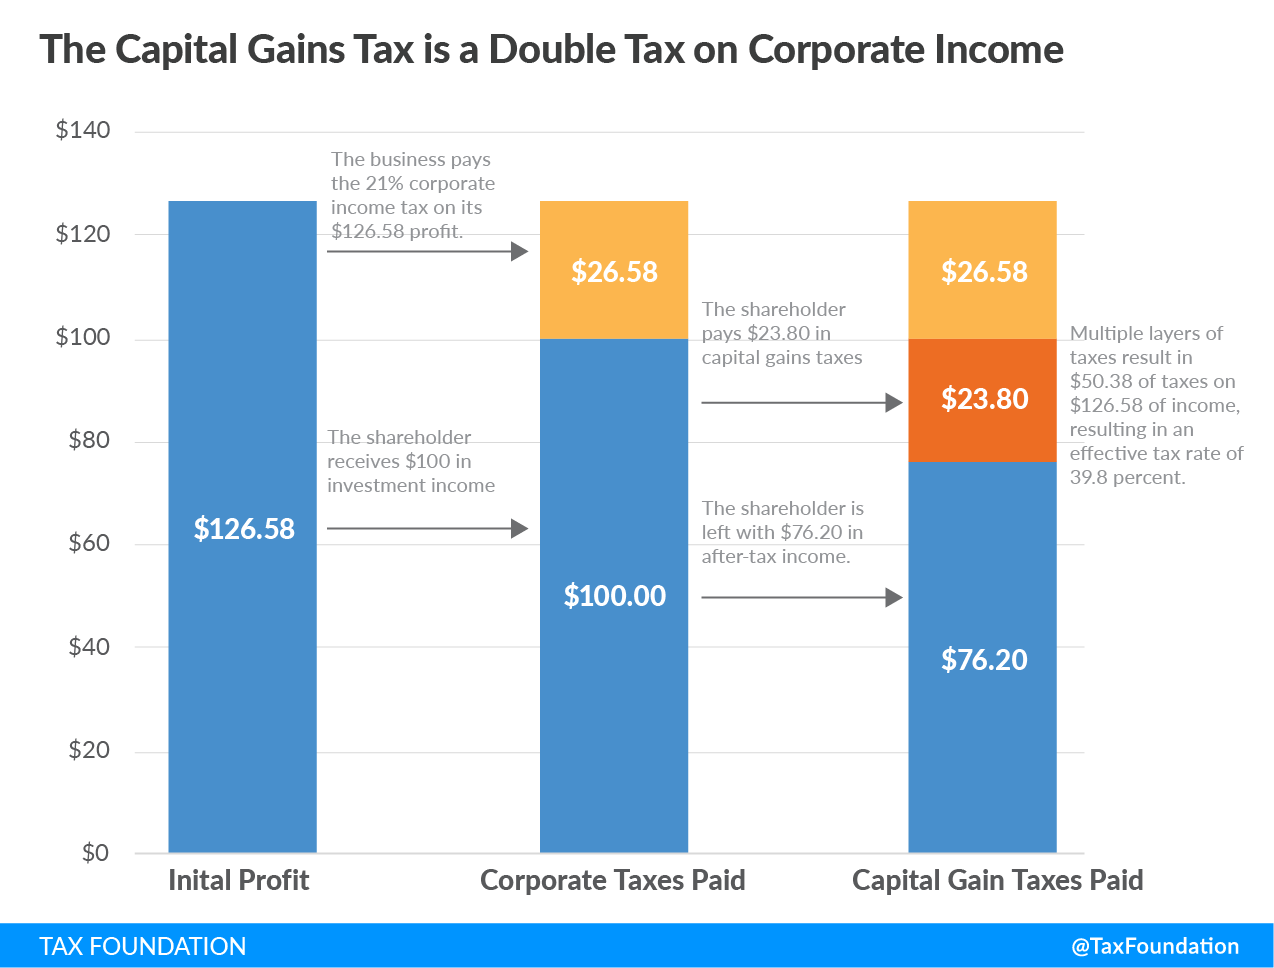 The capital gains tax is a double tax on corporate income, double taxation